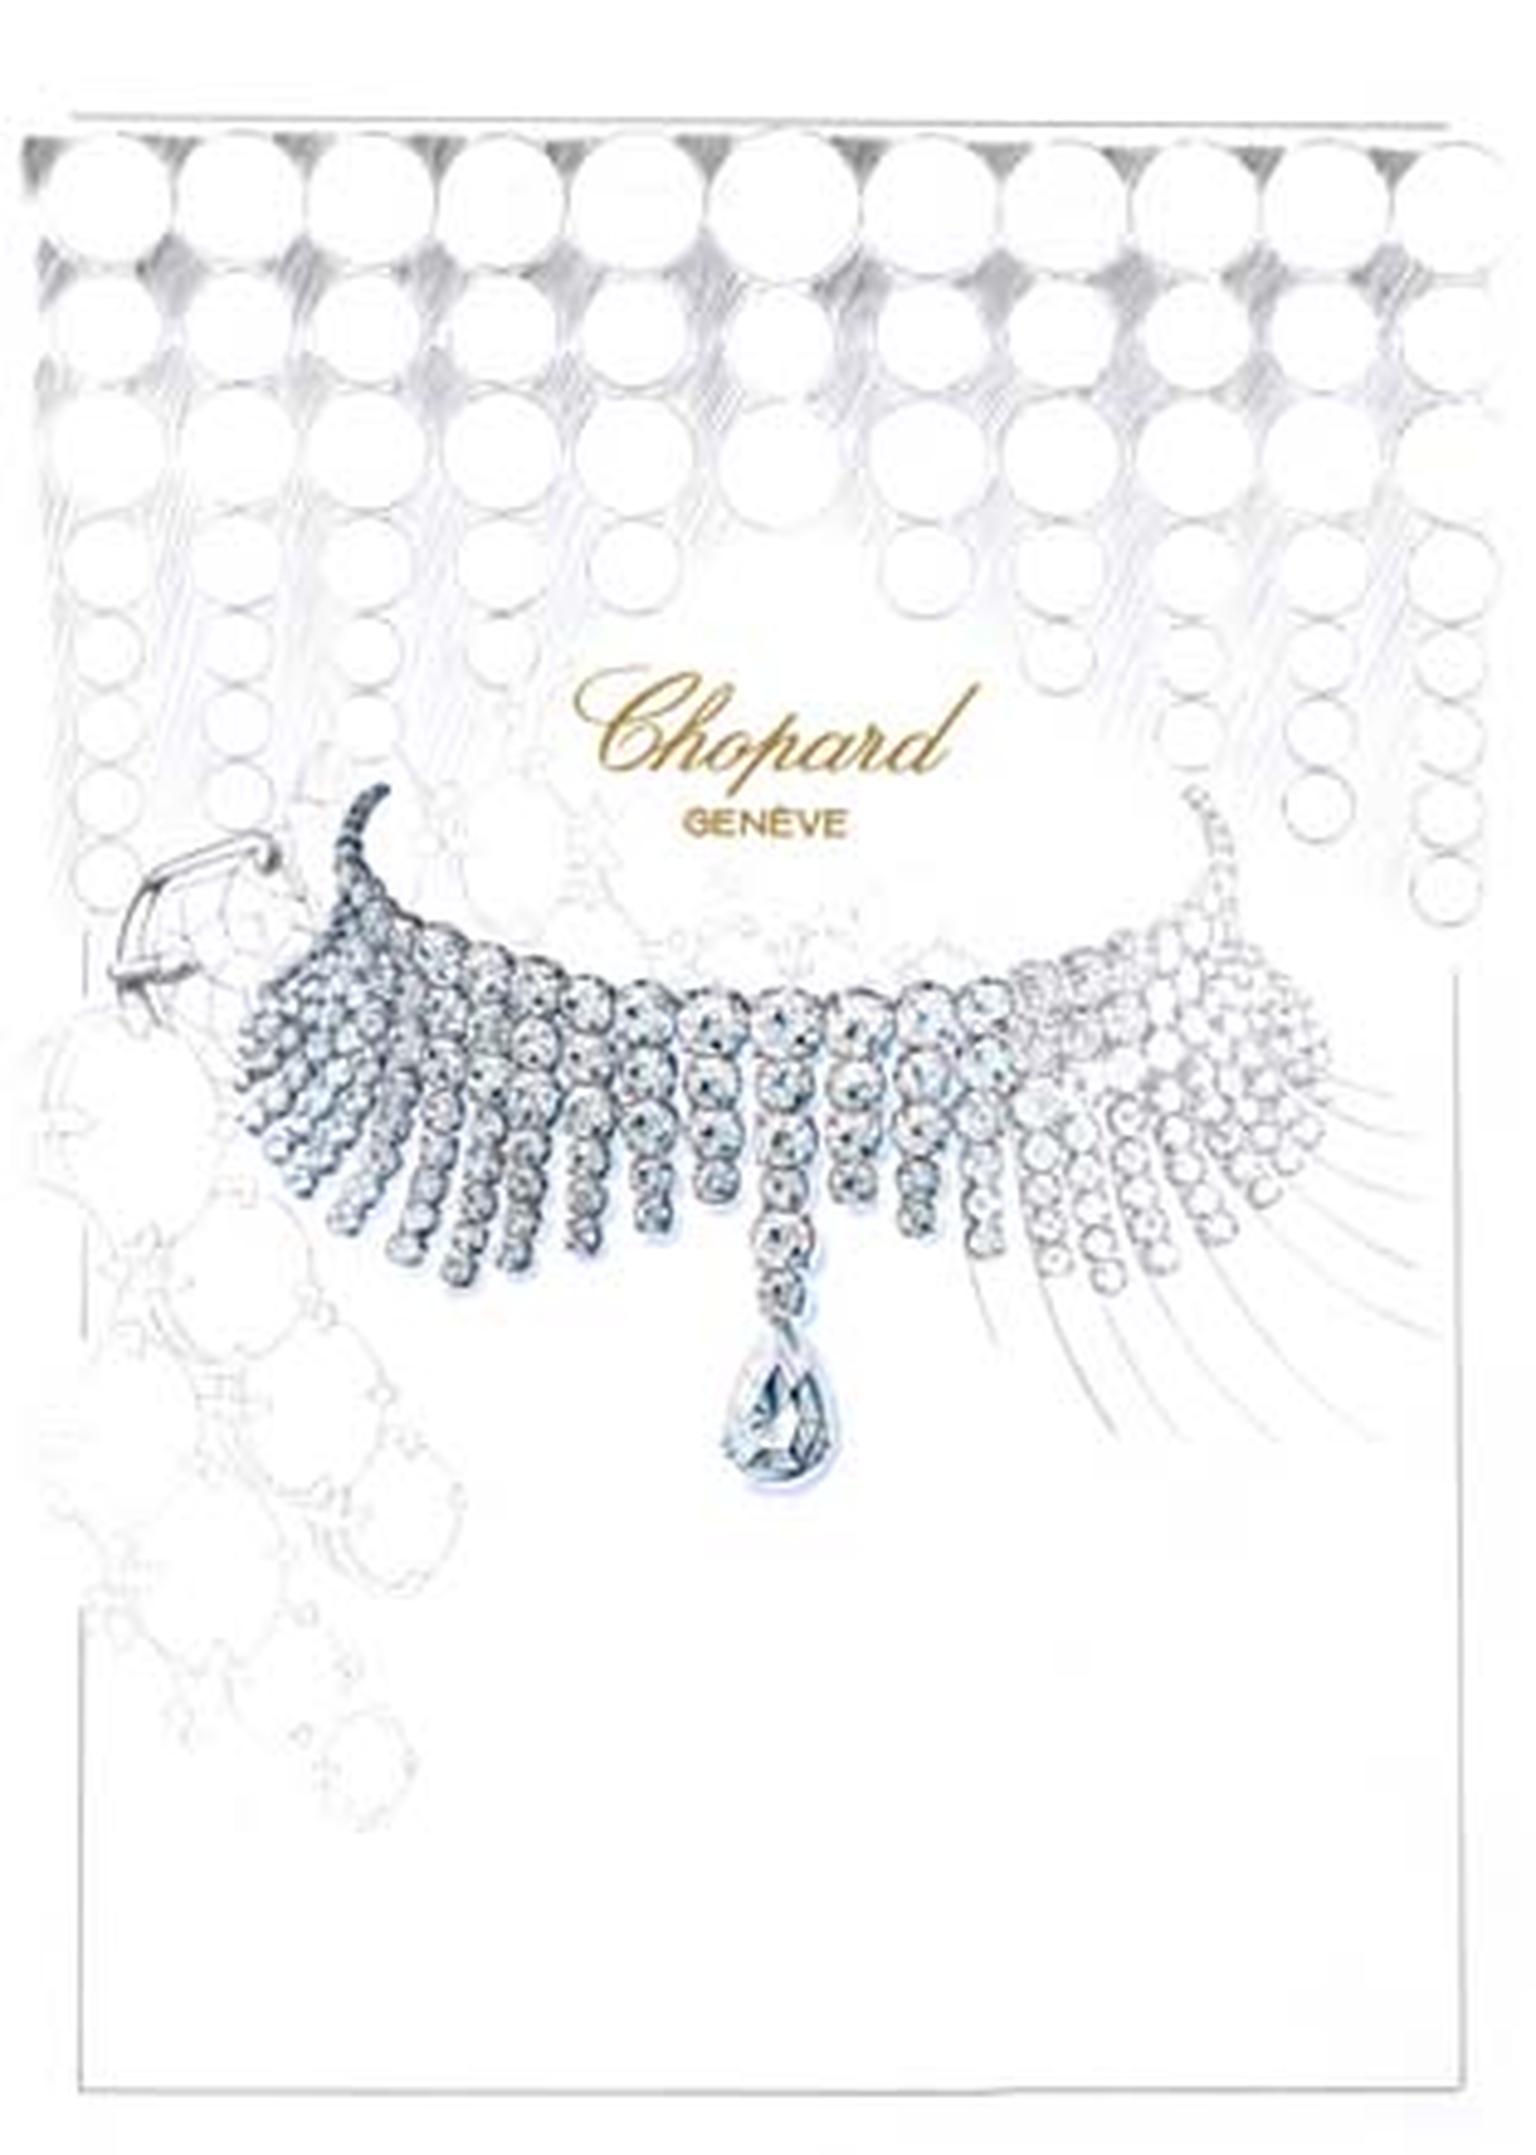 810391-1001 Sketch Diamond Necklace from the Red Carpet Collection 2013.jpg